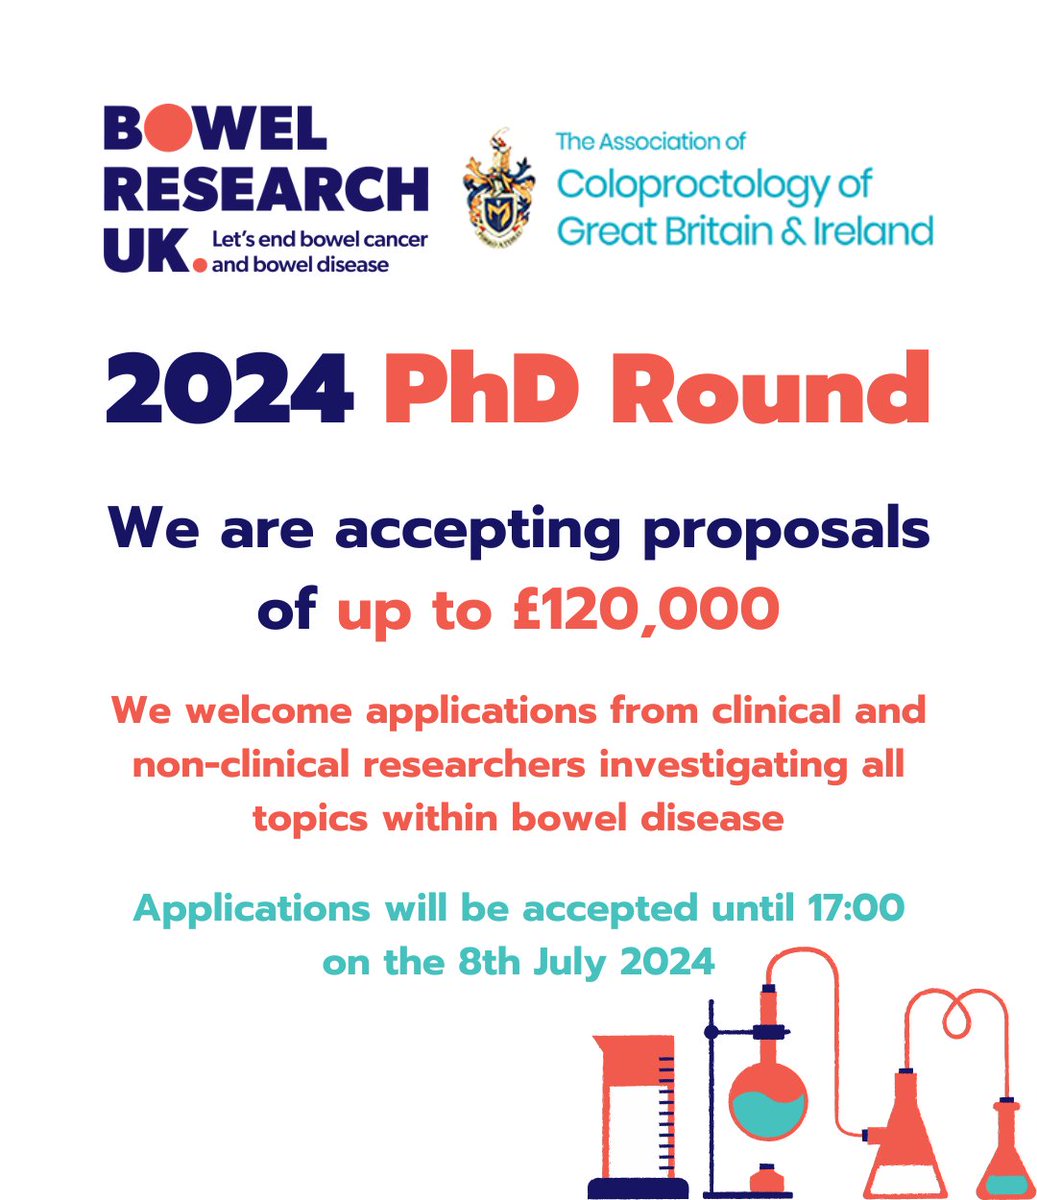 The Bowel Research UK 2024 PhD Grand Round is OPEN!

Find out more information and apply at bowelresearchuk.org/our-research/a…

#SoMe4Surgery #BowelResearch #MedicalResearch #Research #Bowels #BowelDisease #BowelCancer #IBD #IBS #Bowels #BowelHealth